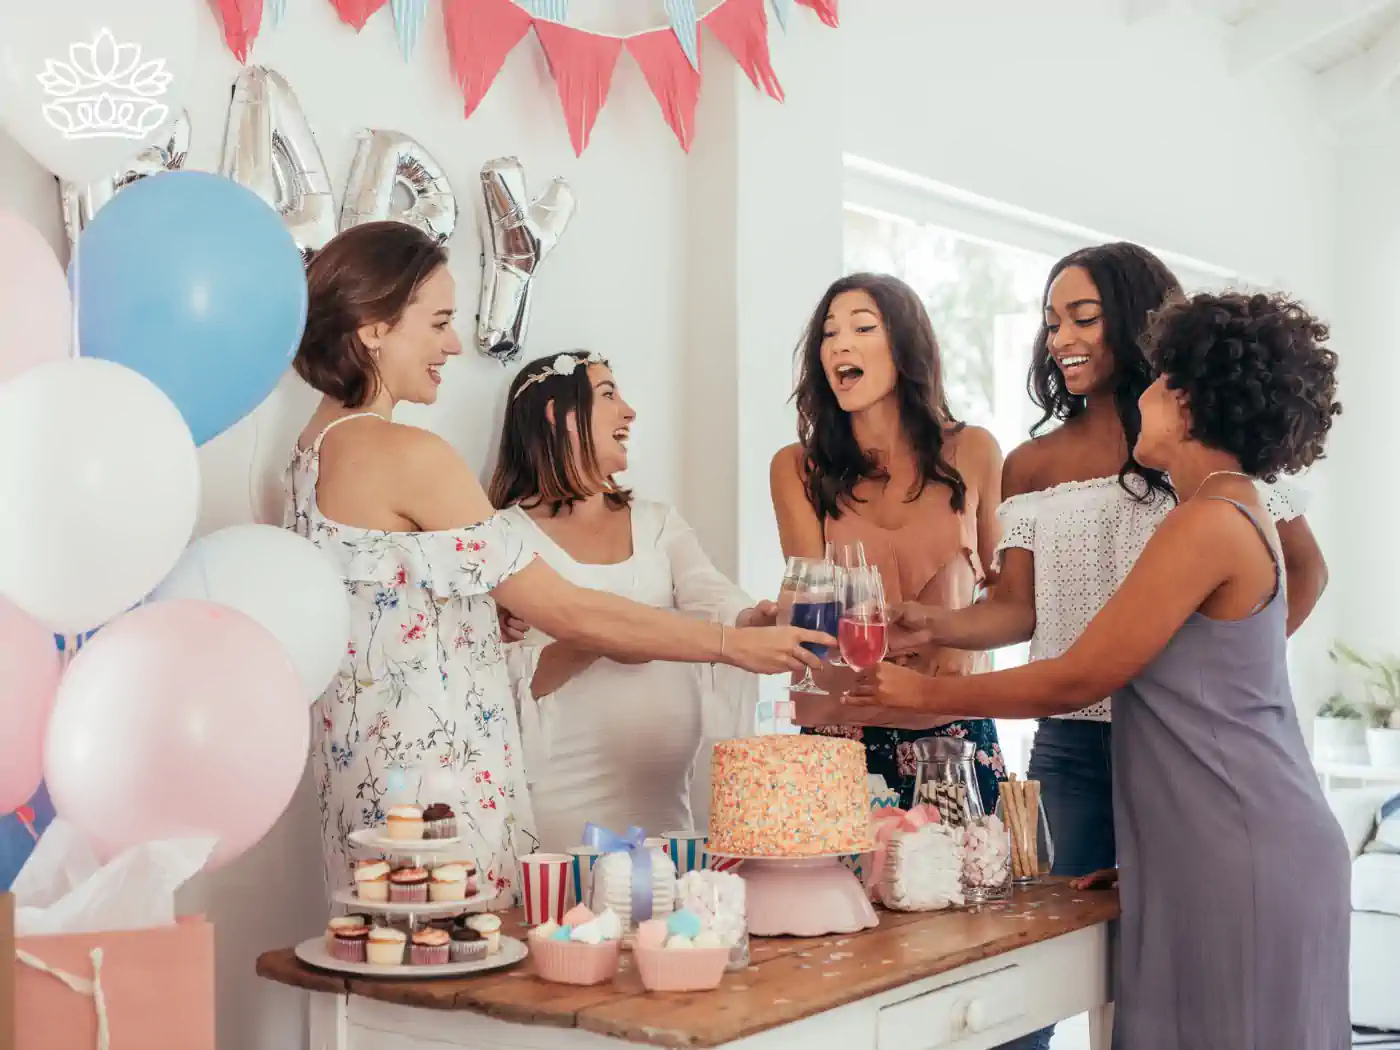 Group of women celebrating a baby shower, gathered around a decorated table with cakes, flowers, and balloons, sharing a joyful moment. Fabulous Flowers and Gifts: Baby Shower Flowers Collection